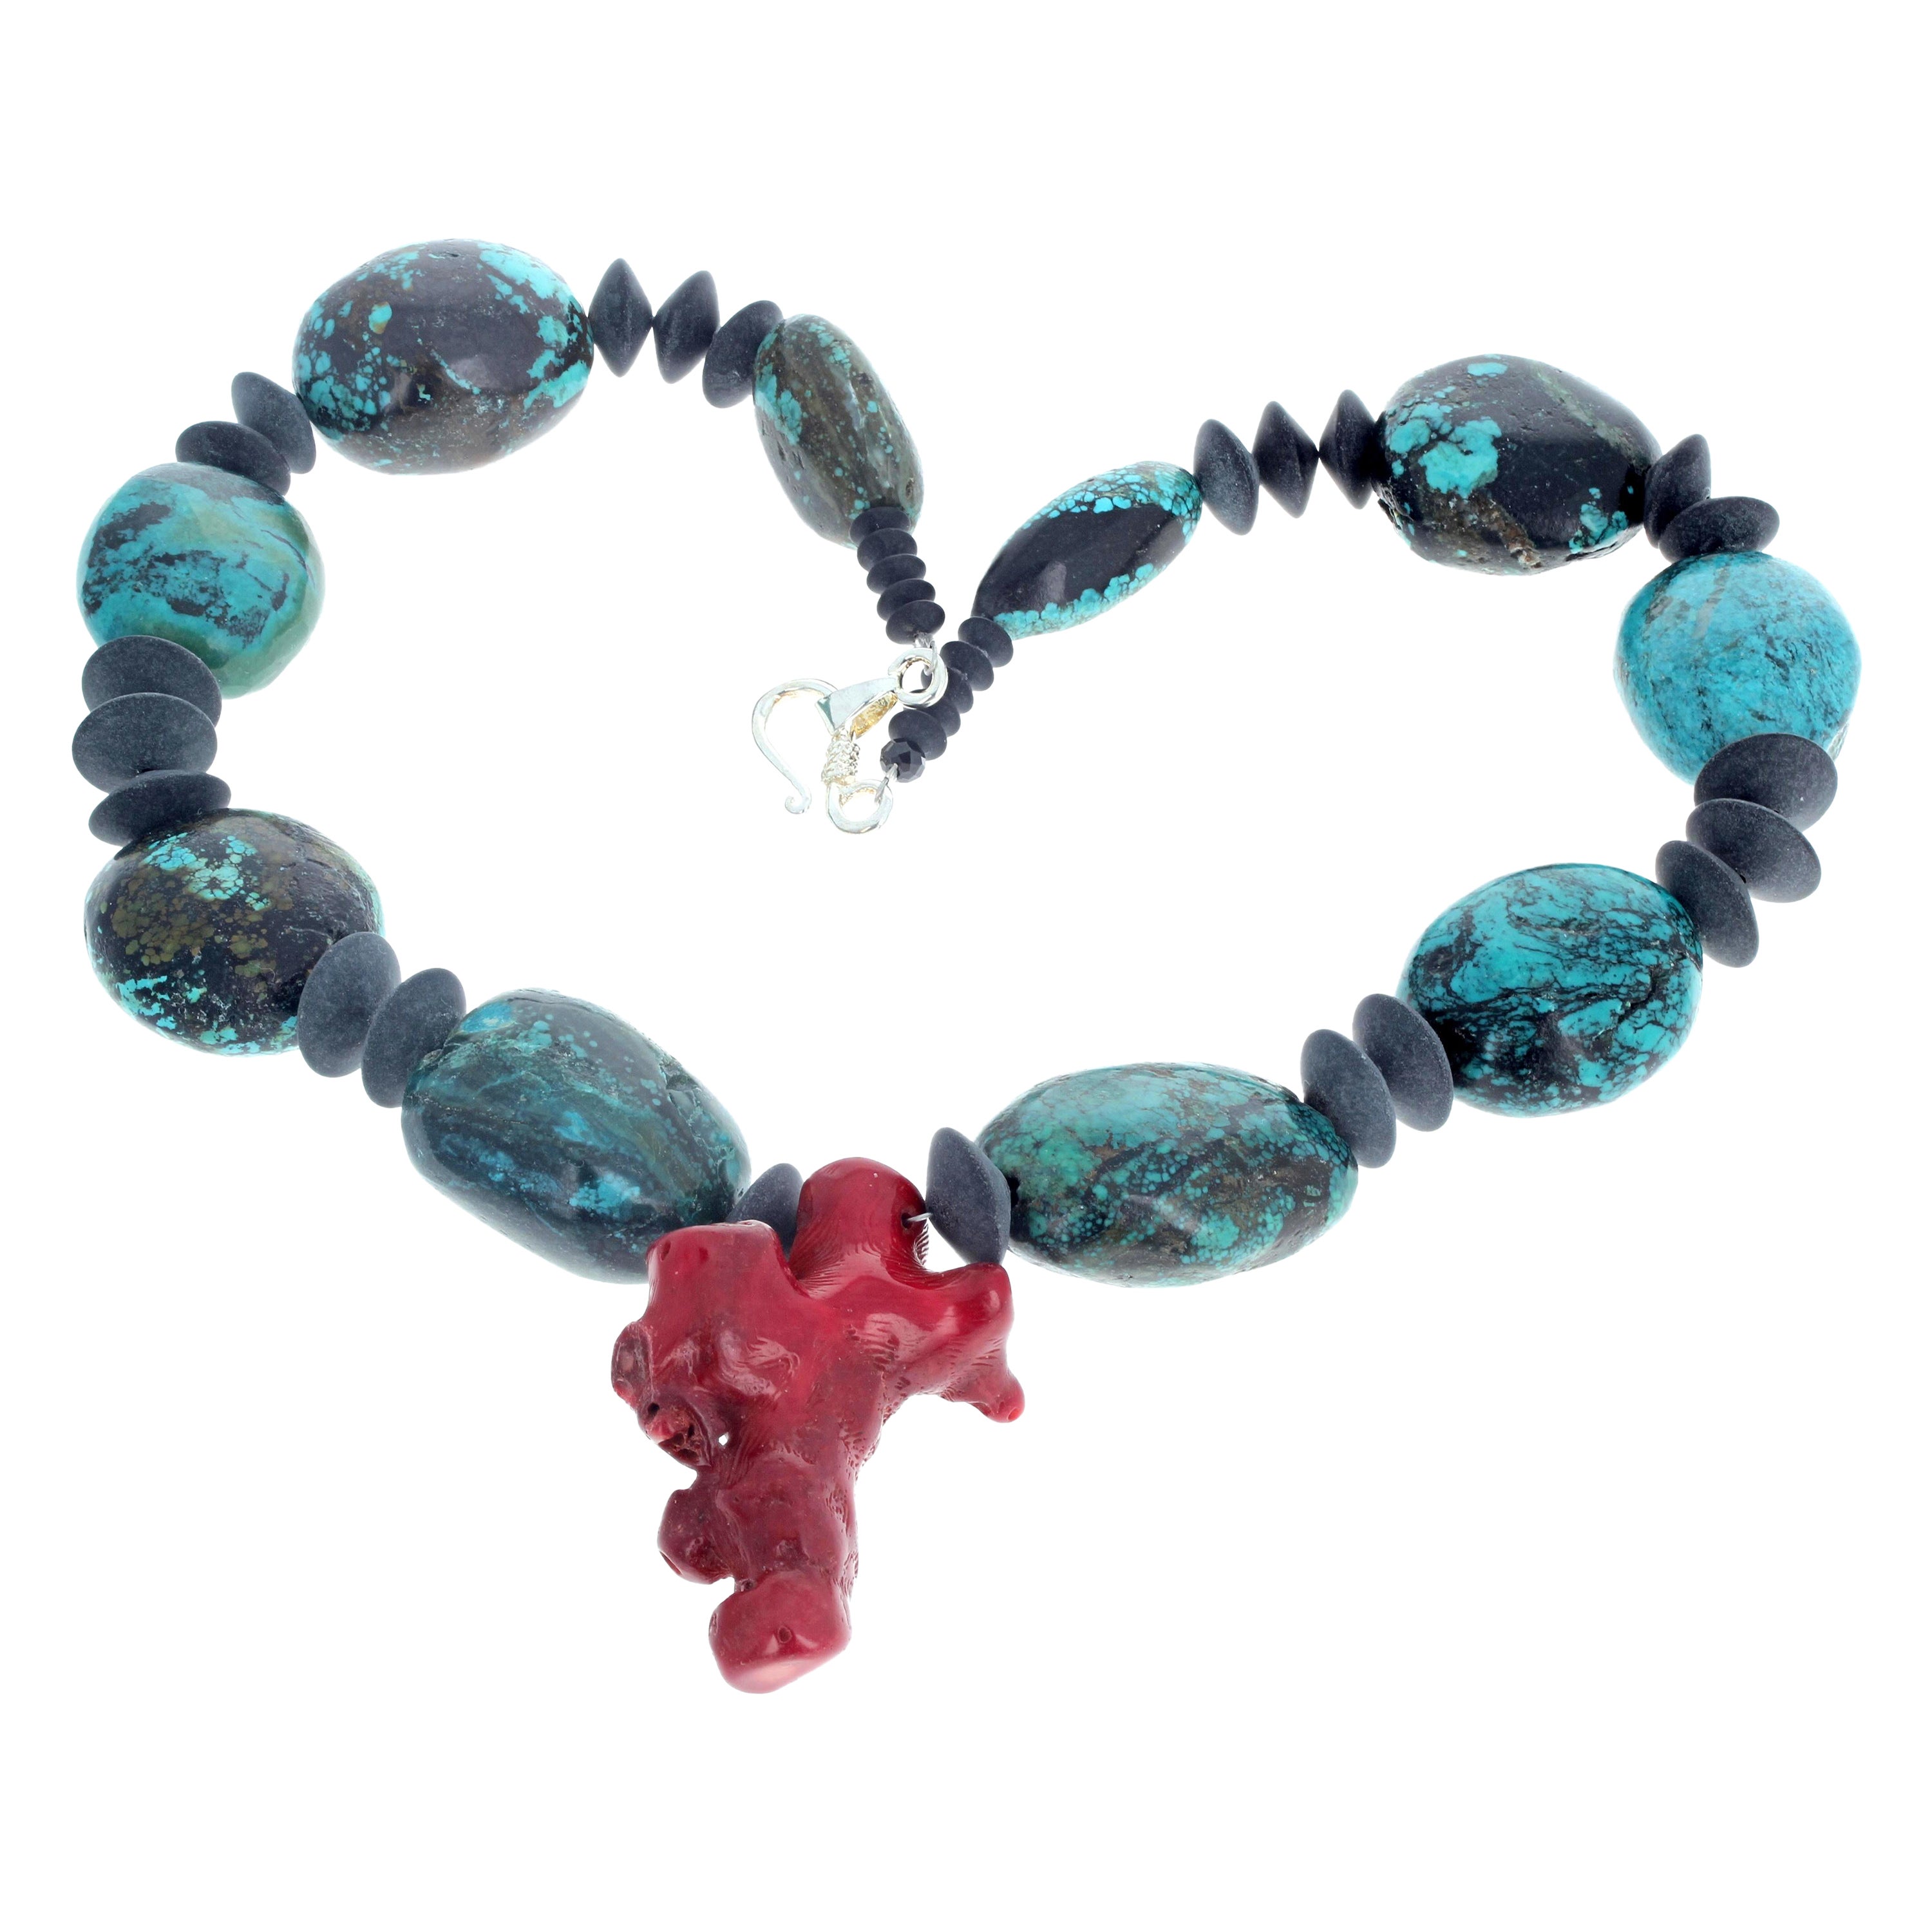 AJD Elegant Statement Turquoise, Onyx & Coral 20 1/2" Necklace